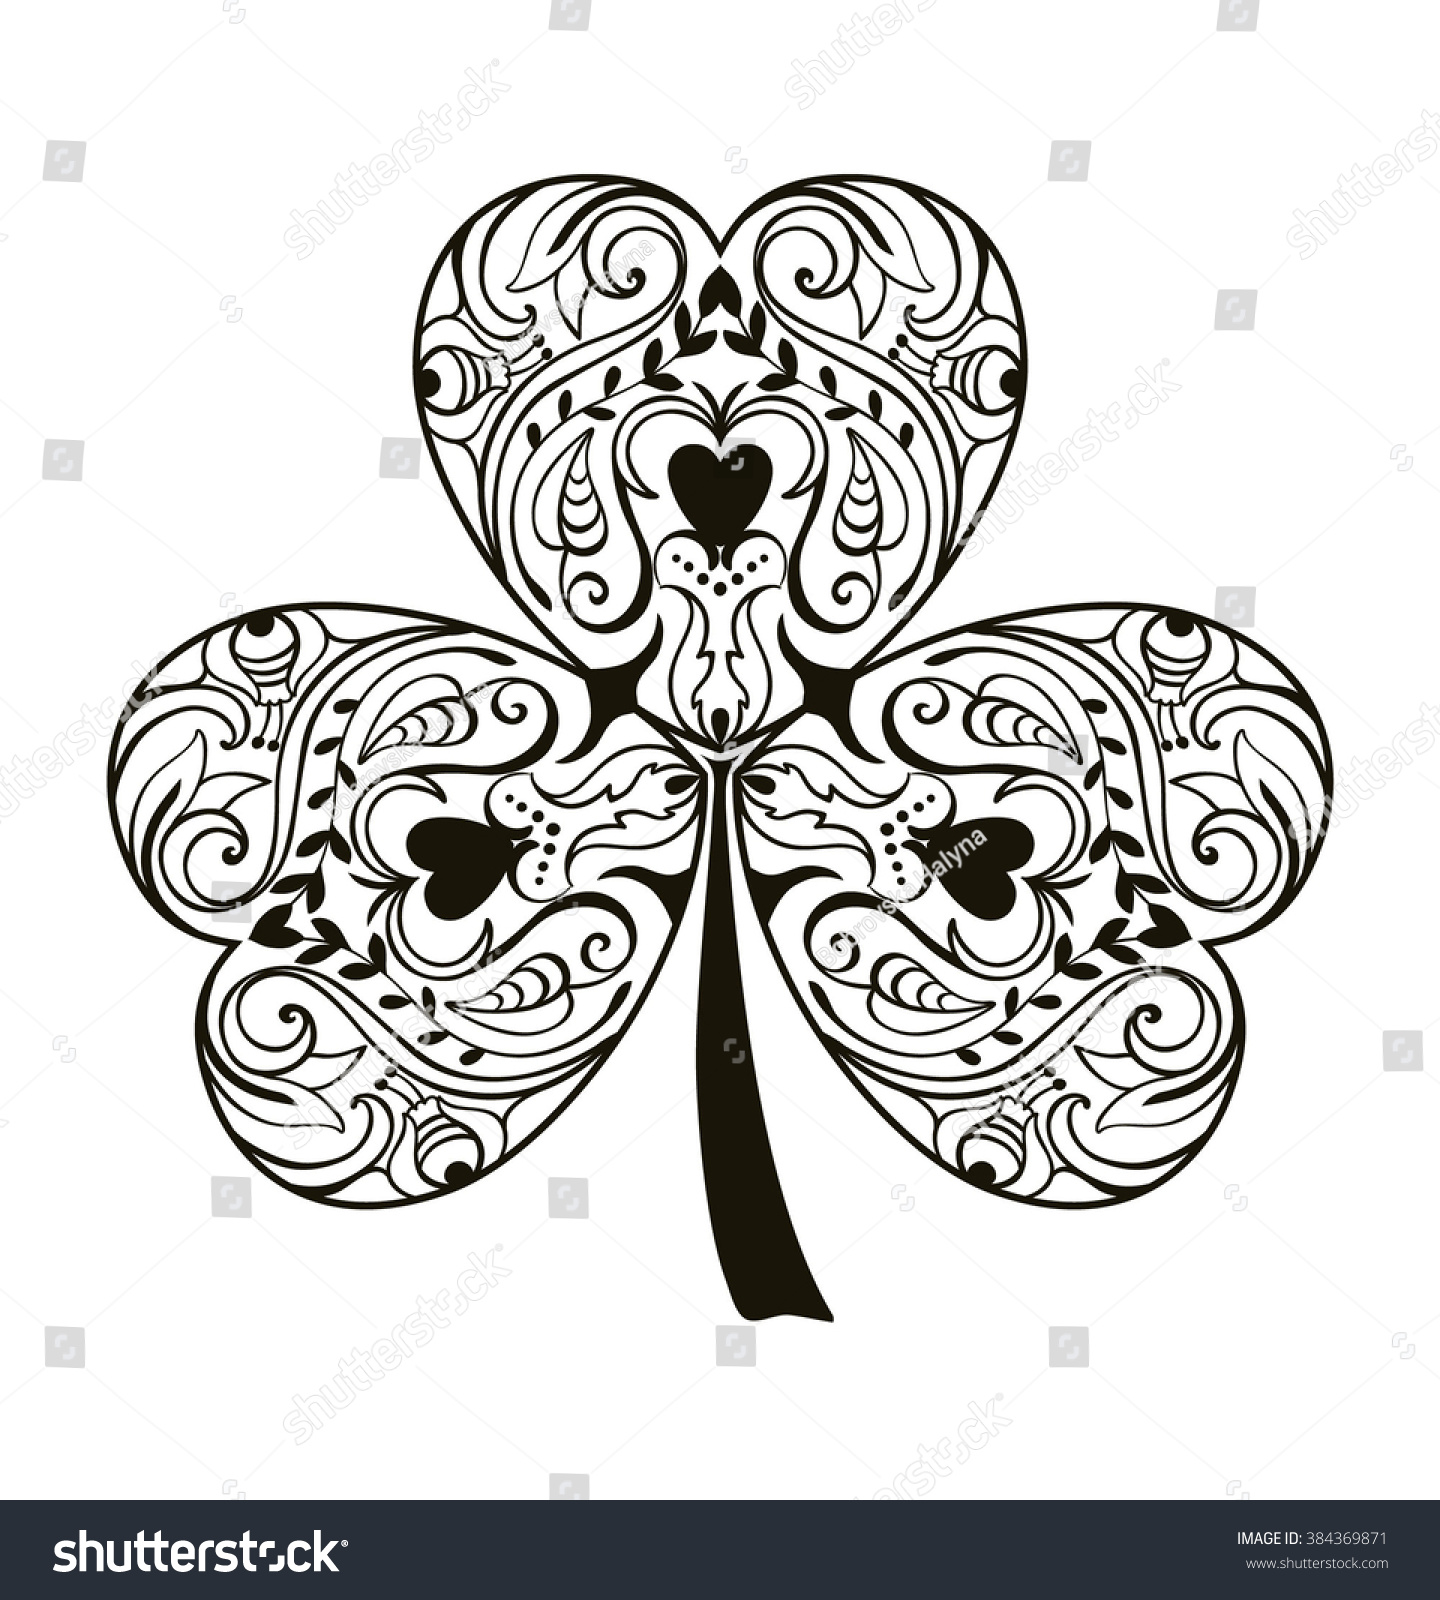 Leaf clover three leaves decorated floral stock vector royalty free